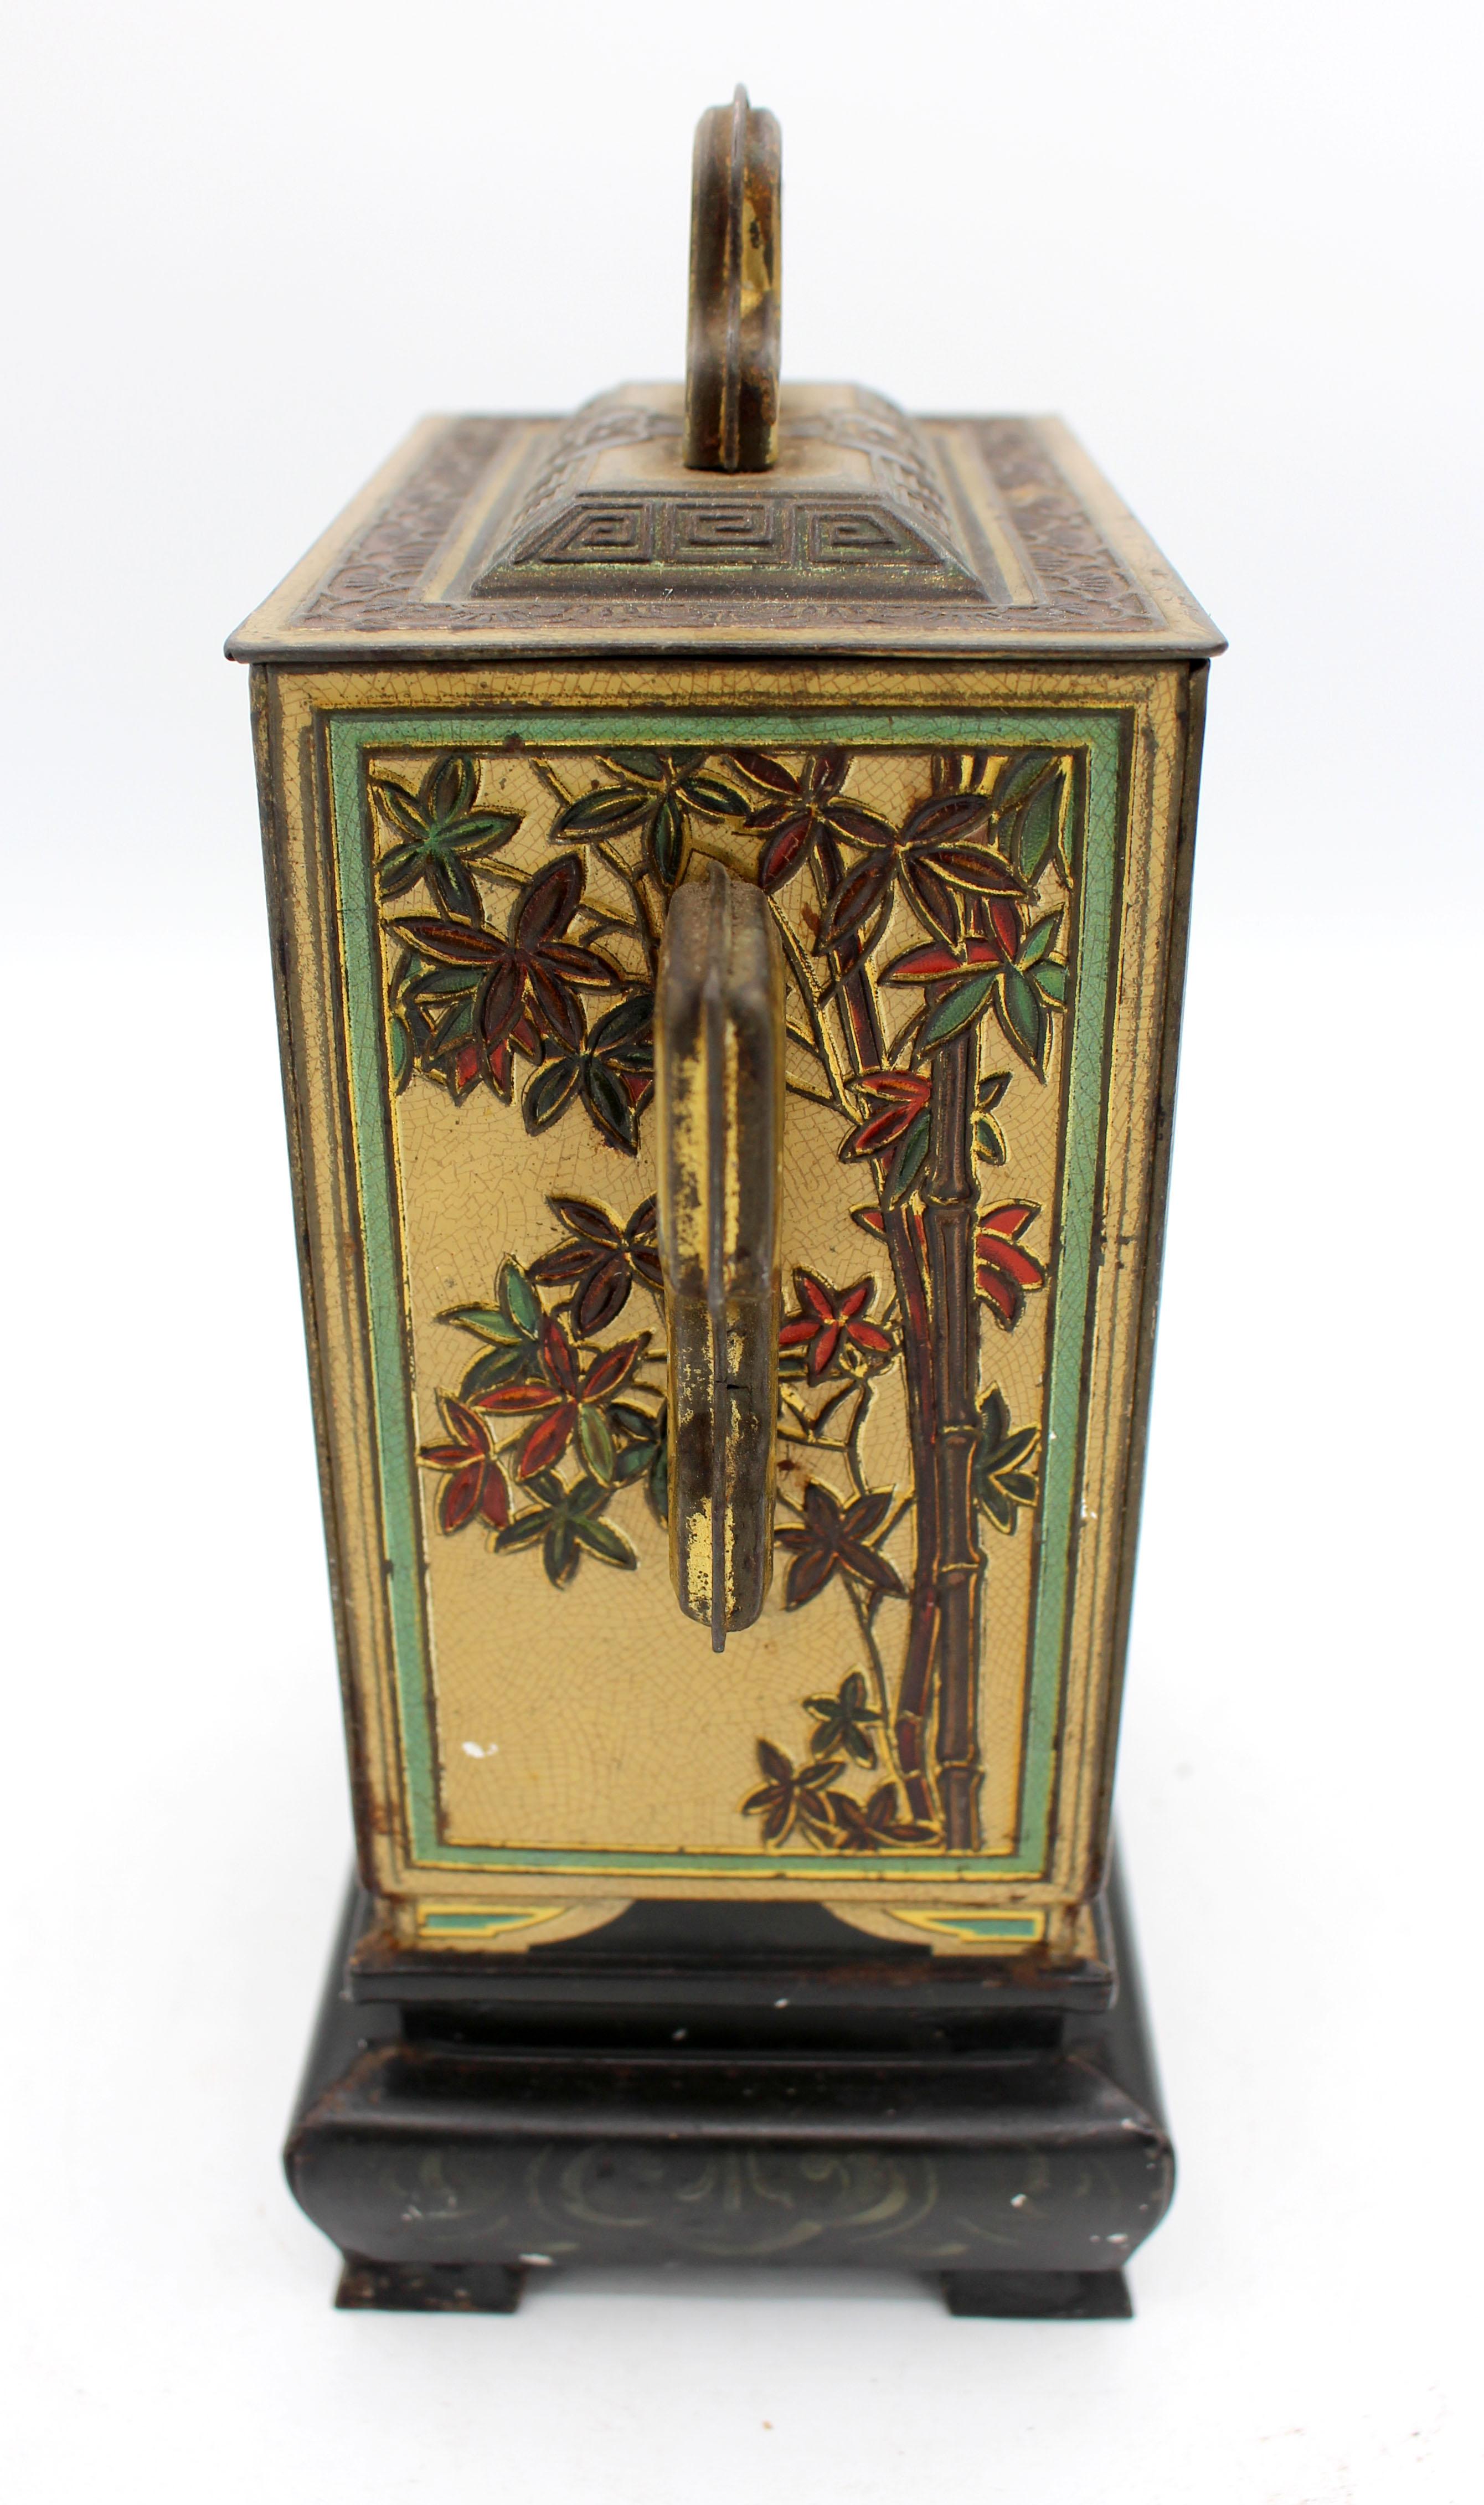 1920 Huntley & Palmers Chinoserie jar on stand form biscuit tin box. The sides are richly decorated with birds & flowers, bamboo, etc. Extensive bottom stamp lists the grand prize of 1878 & 1900 in Paris, etc. Identical to the example in the